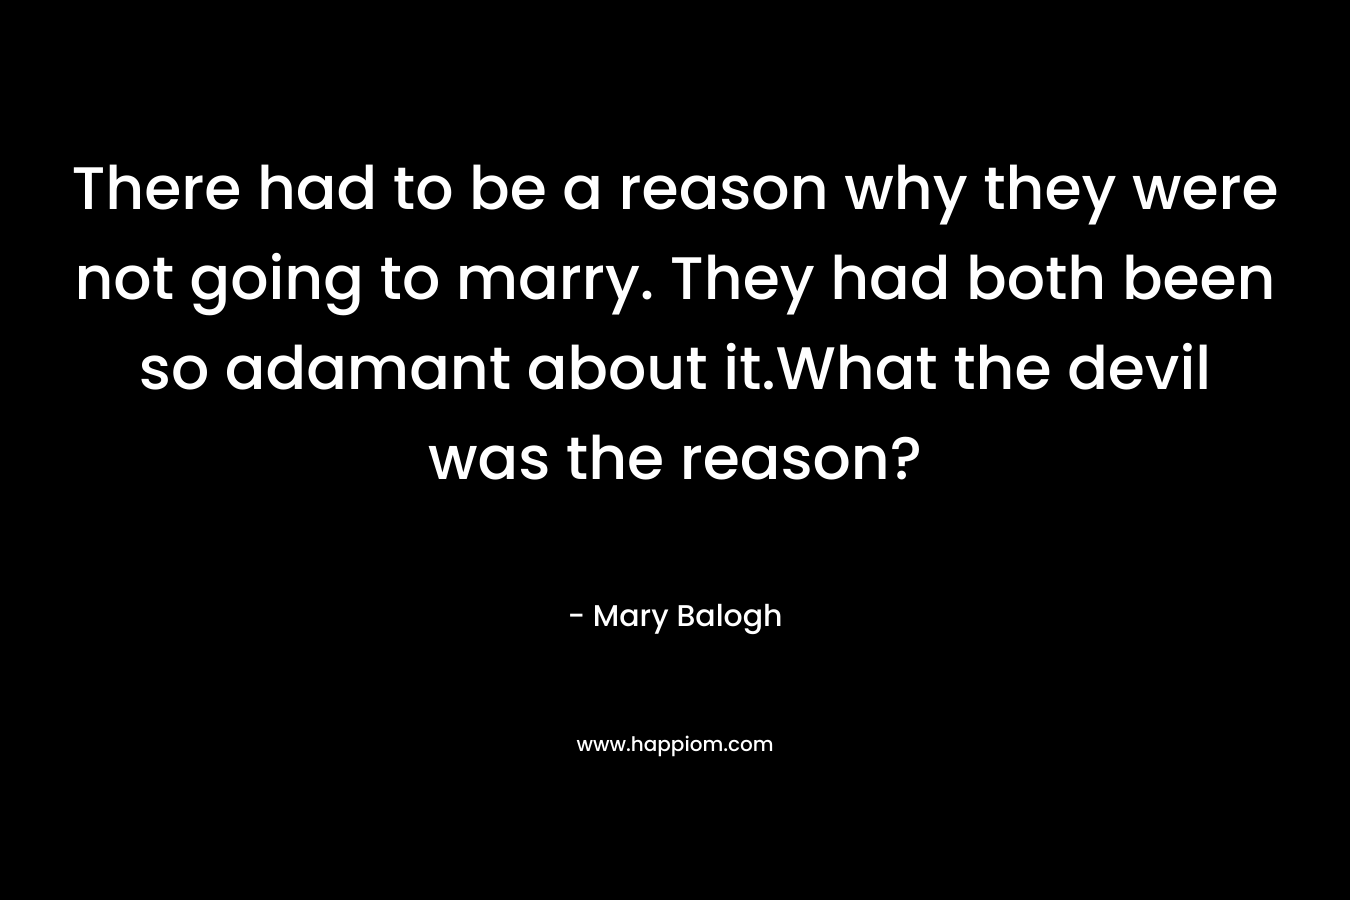 There had to be a reason why they were not going to marry. They had both been so adamant about it.What the devil was the reason?